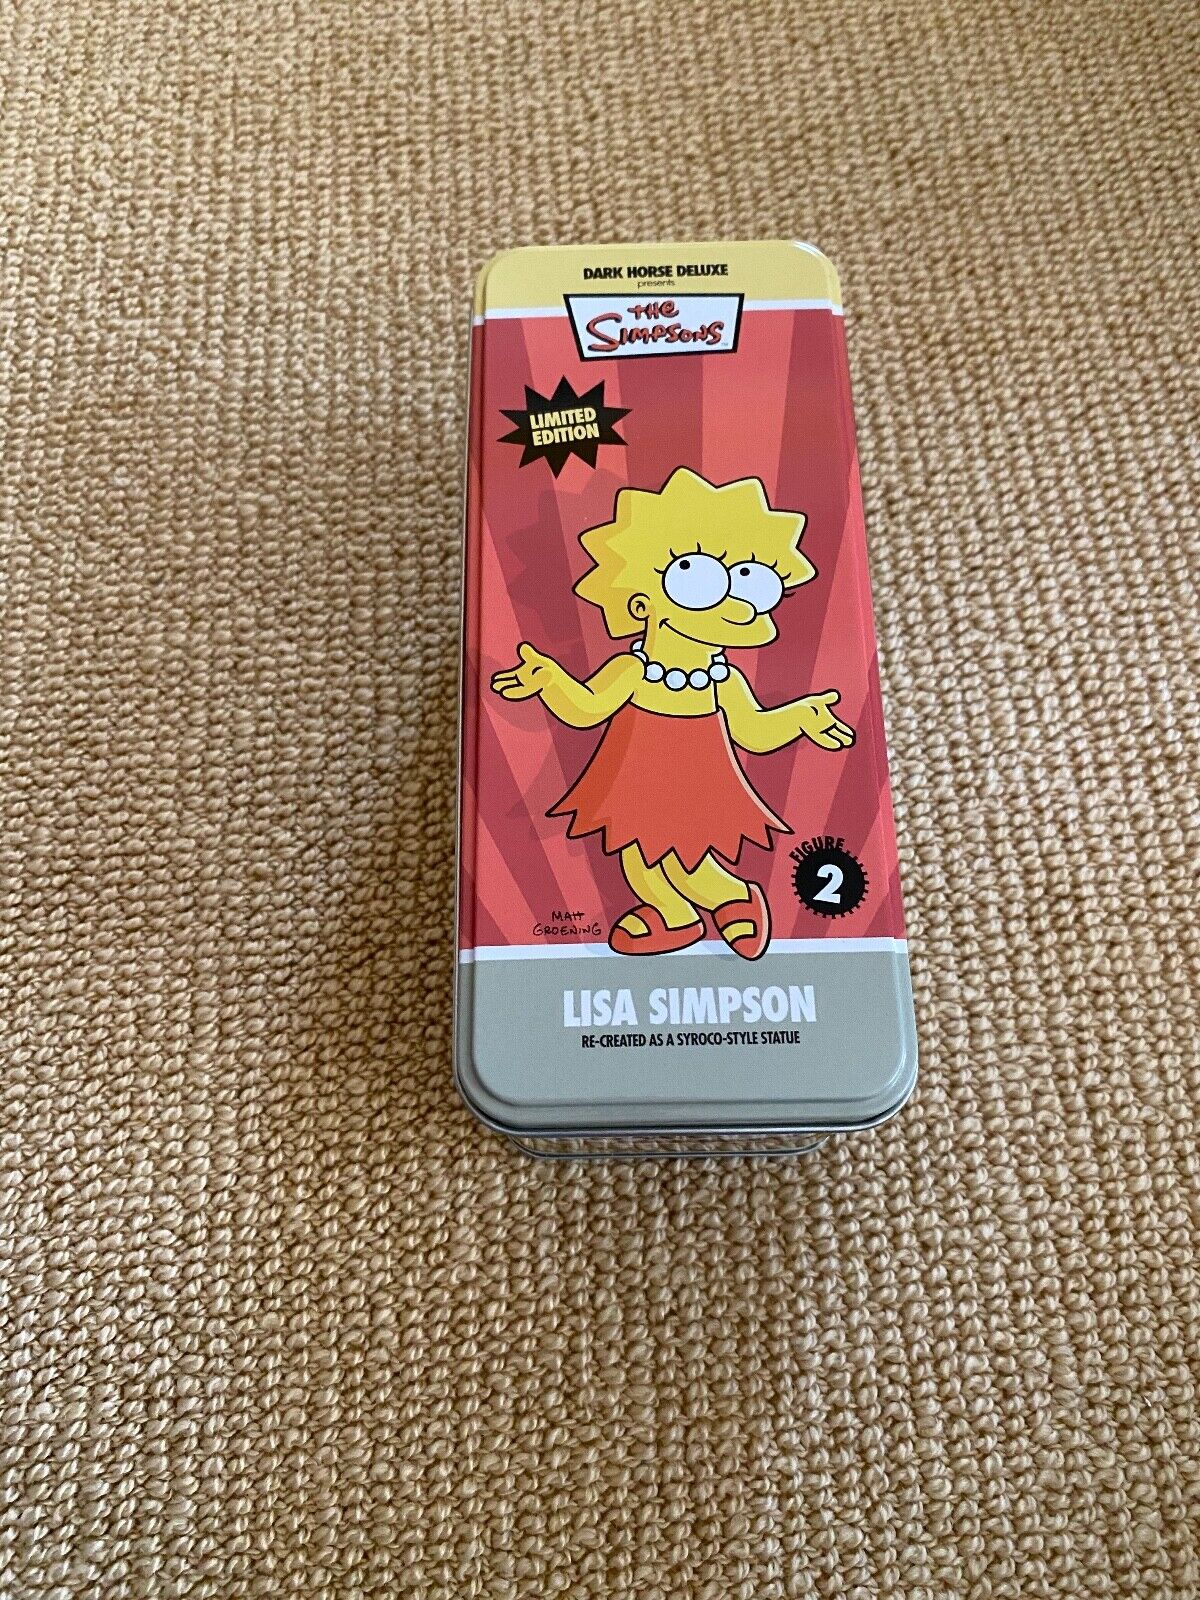 Dark Horse Deluxe The Simpsons Classic Character: Lisa Simpson Statue #2 108/550